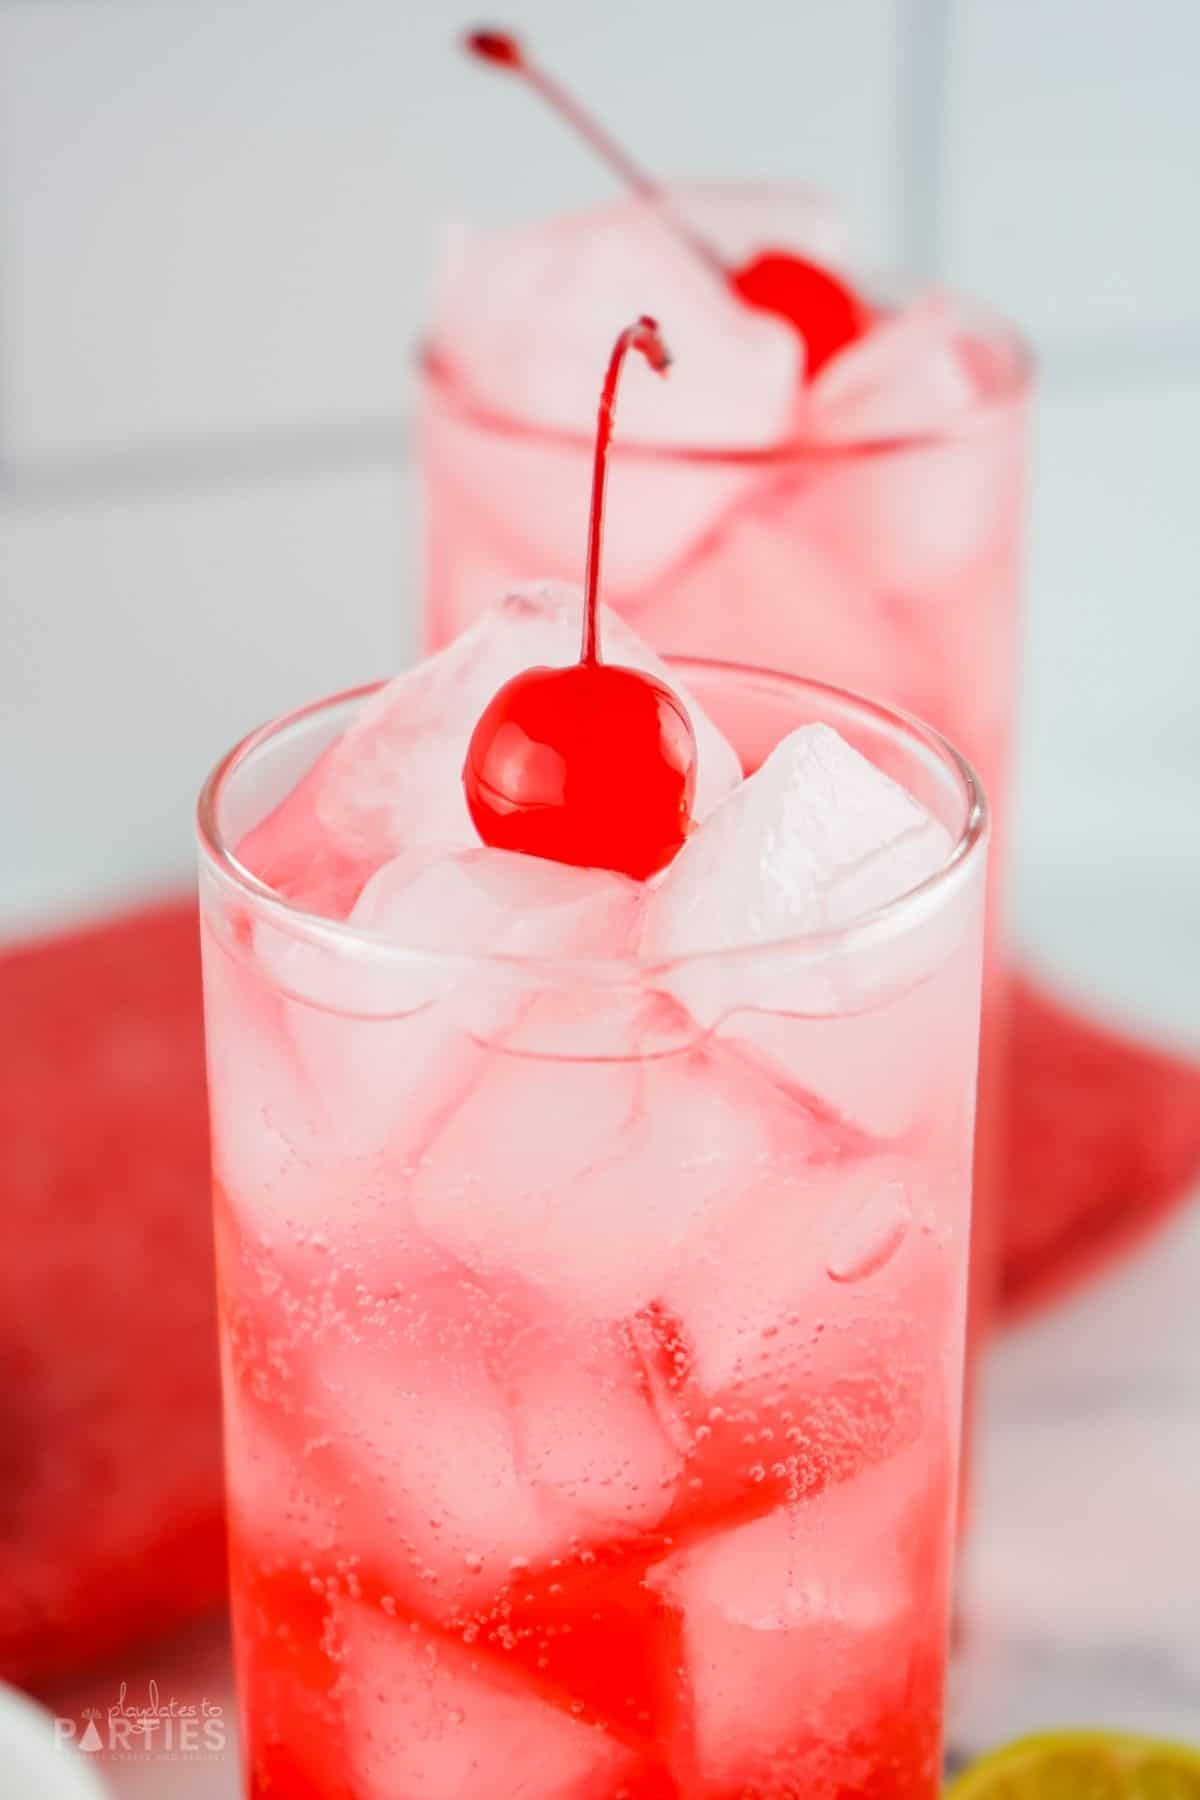 Close up of a maraschino cherry on an ice cold red drink.